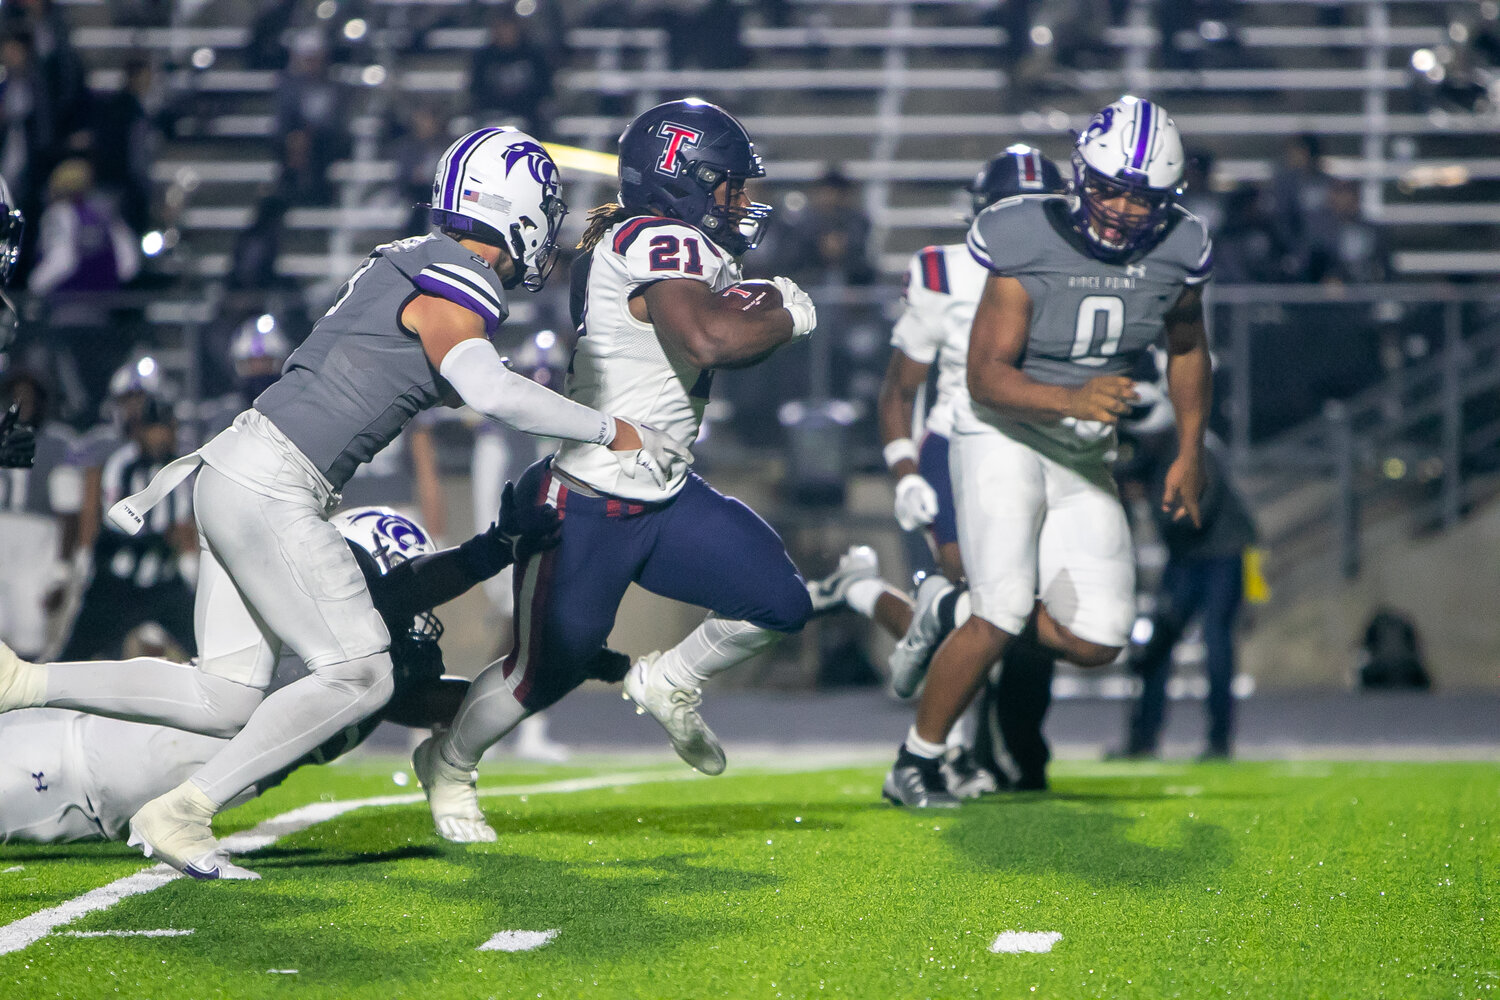 Caleb Blocker races past defenders during Friday's game between Tompkins and Ridge Point at Hall Stadium.